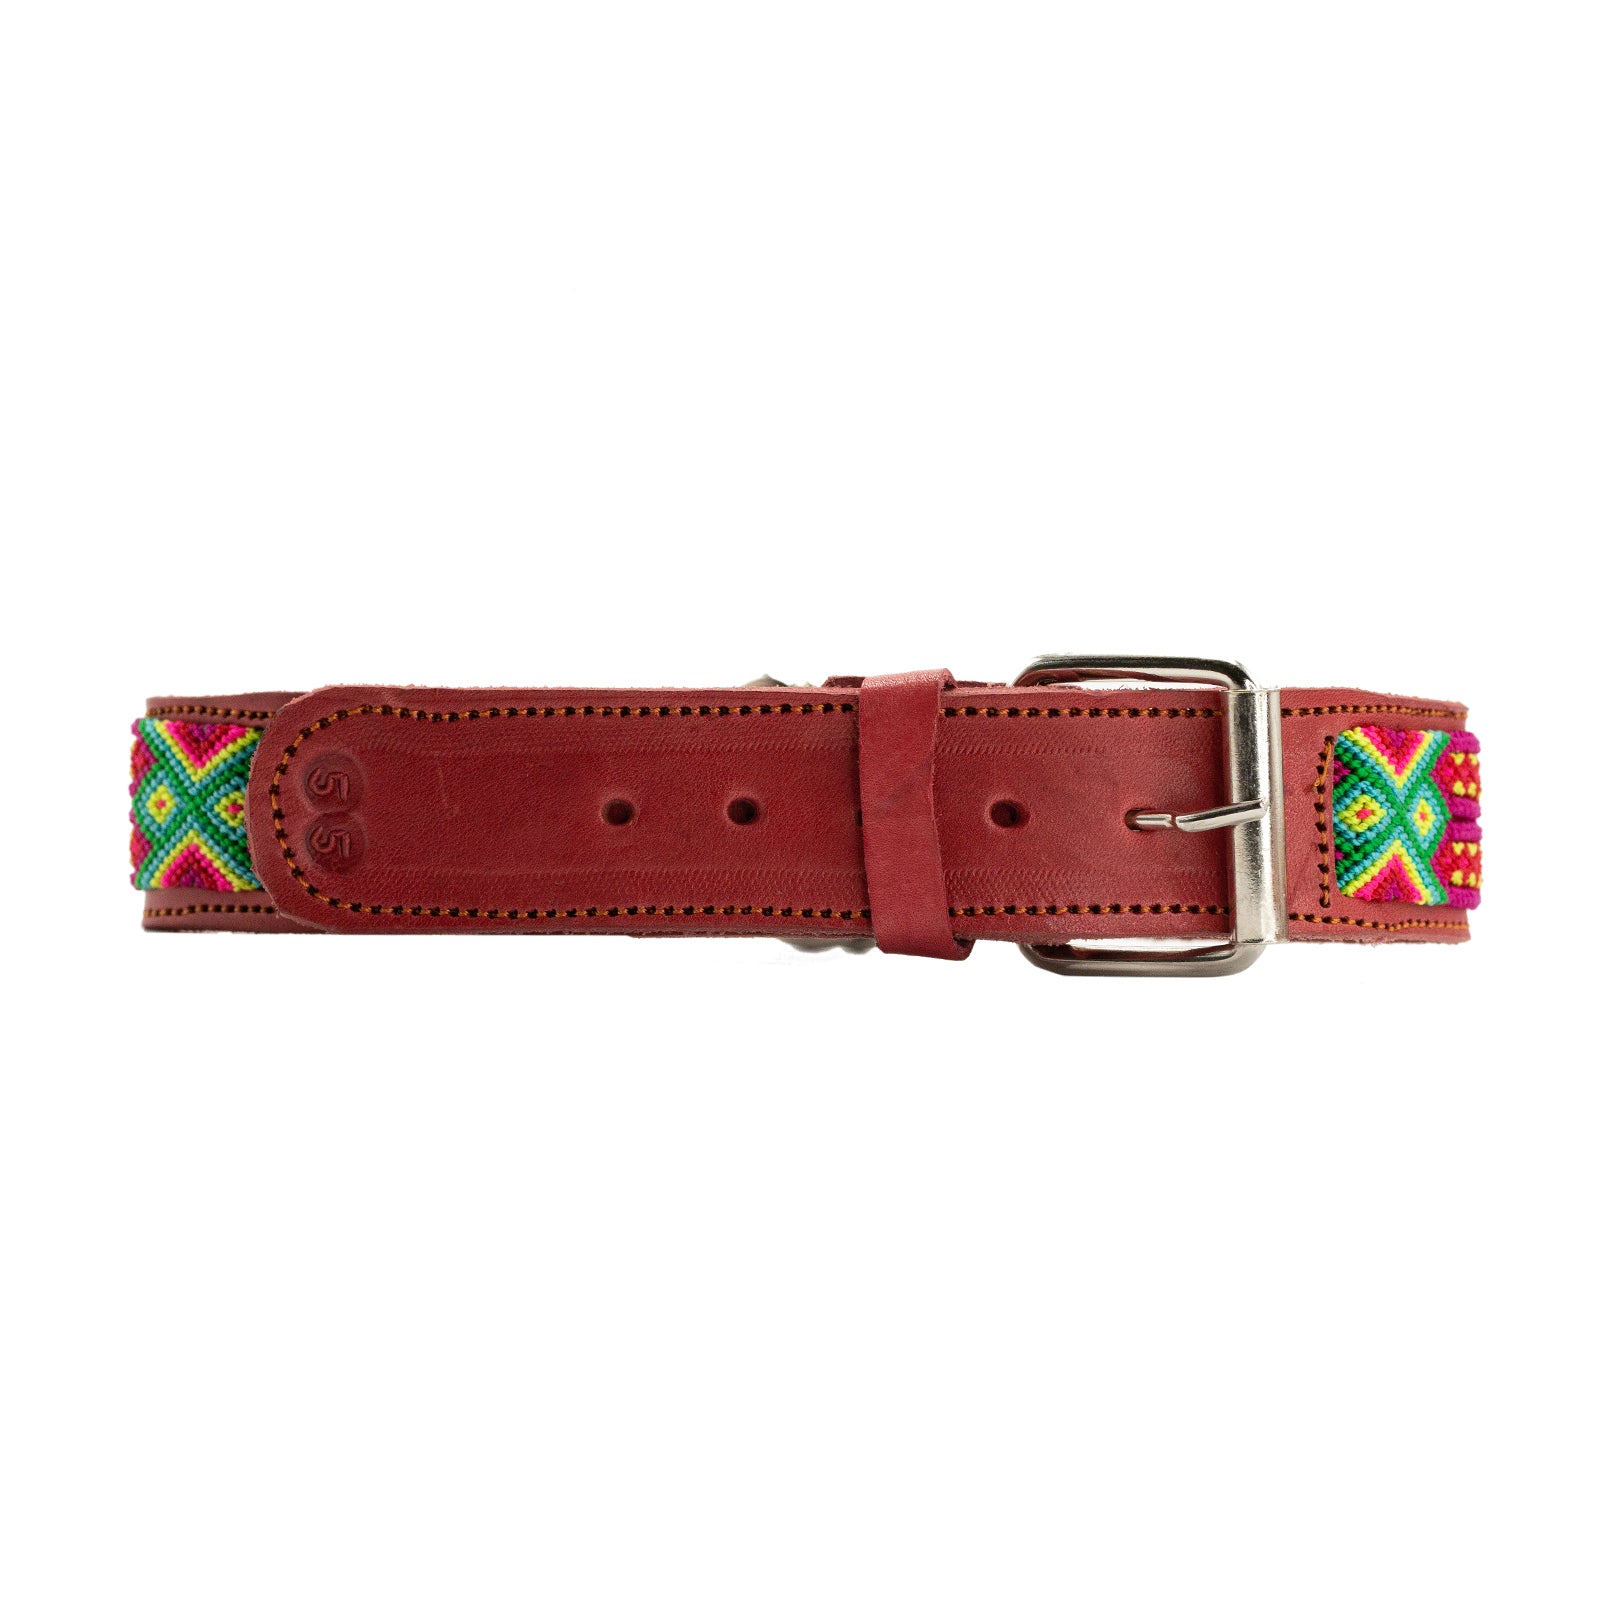 Artisan-crafted leather collar for pets with stunning woven designs